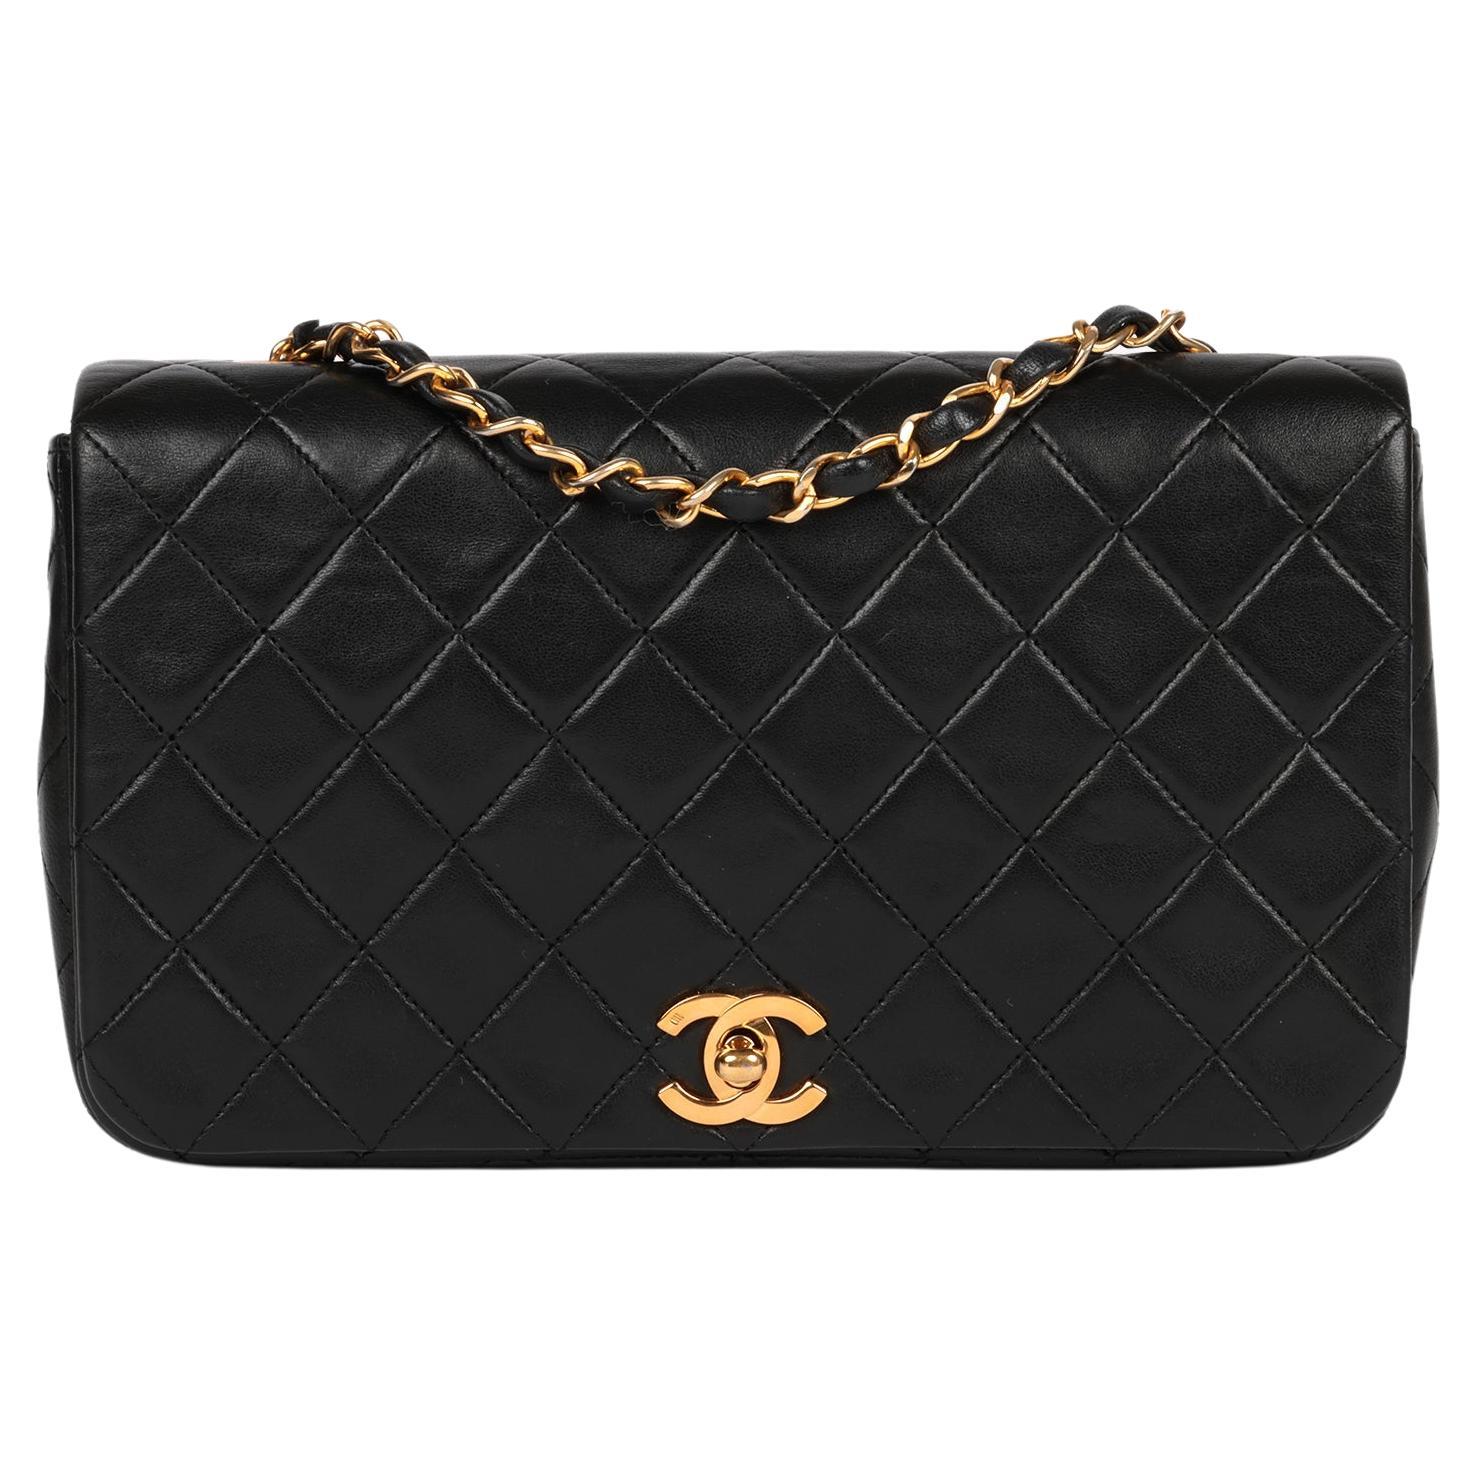 Do all Chanel bags have quilting?